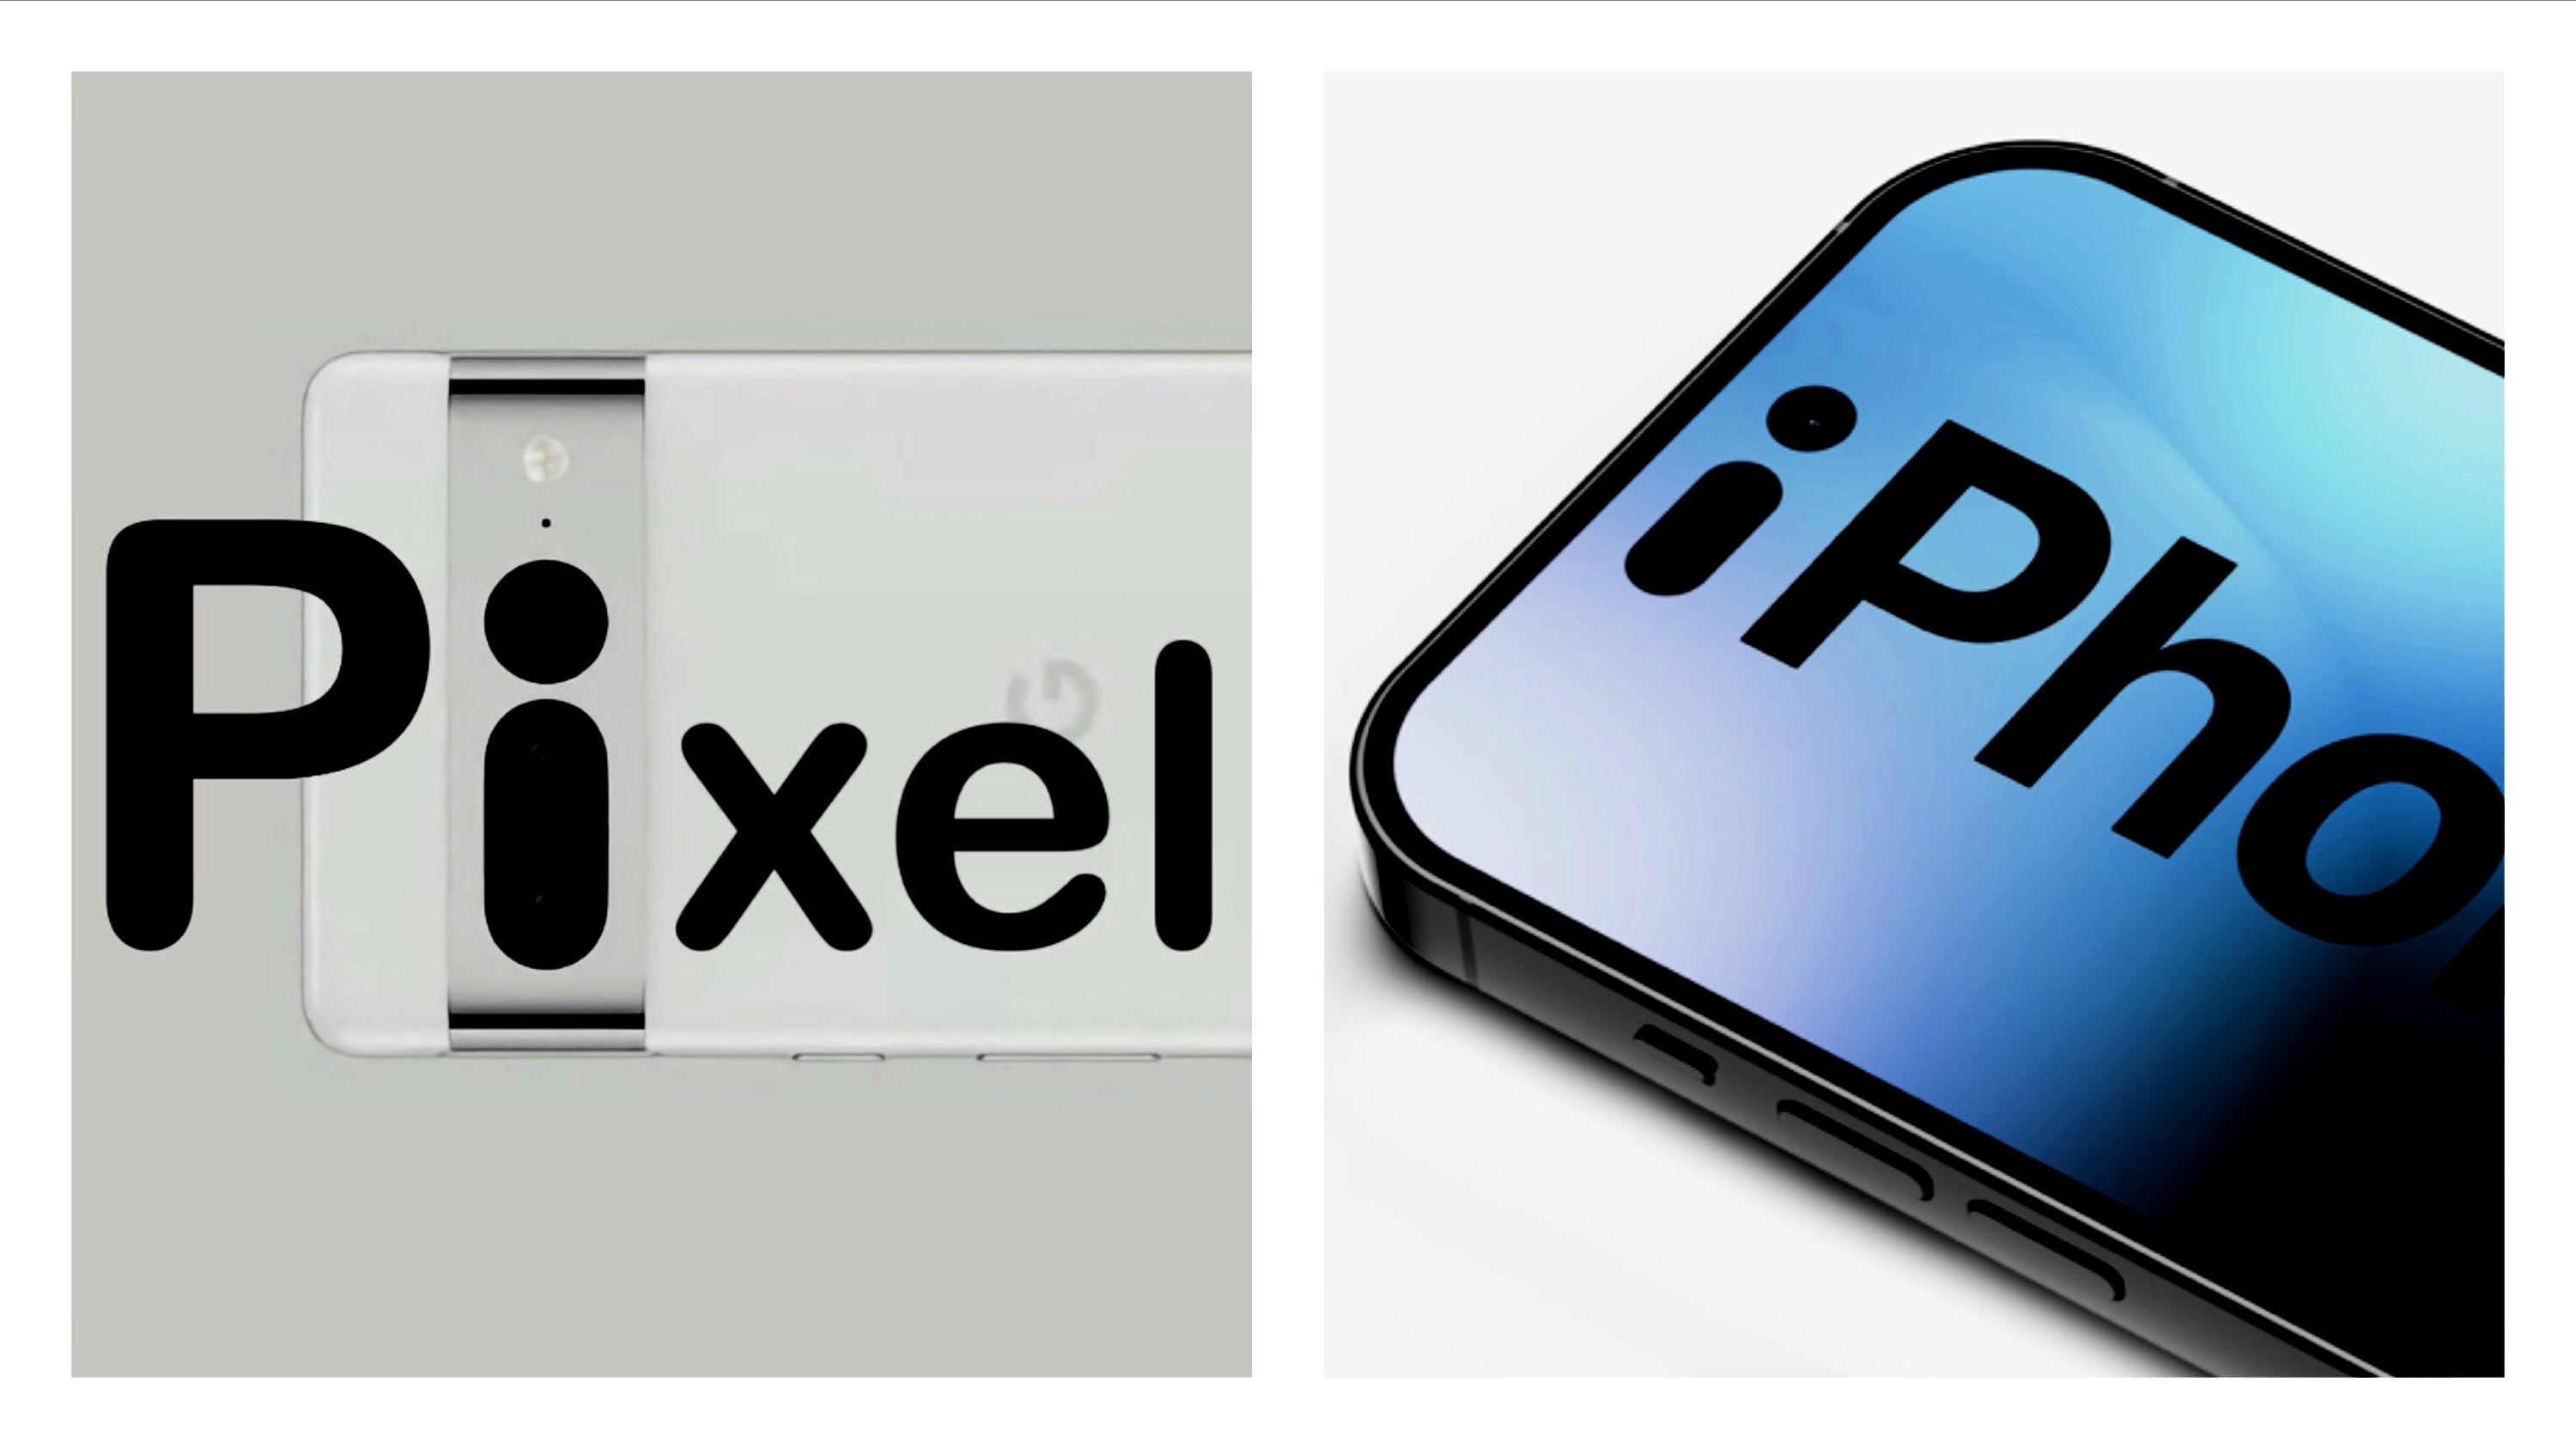 Suspiciously similar iPhone 14 Pro and Pixel 7 Pro designs: Who's the copycat?